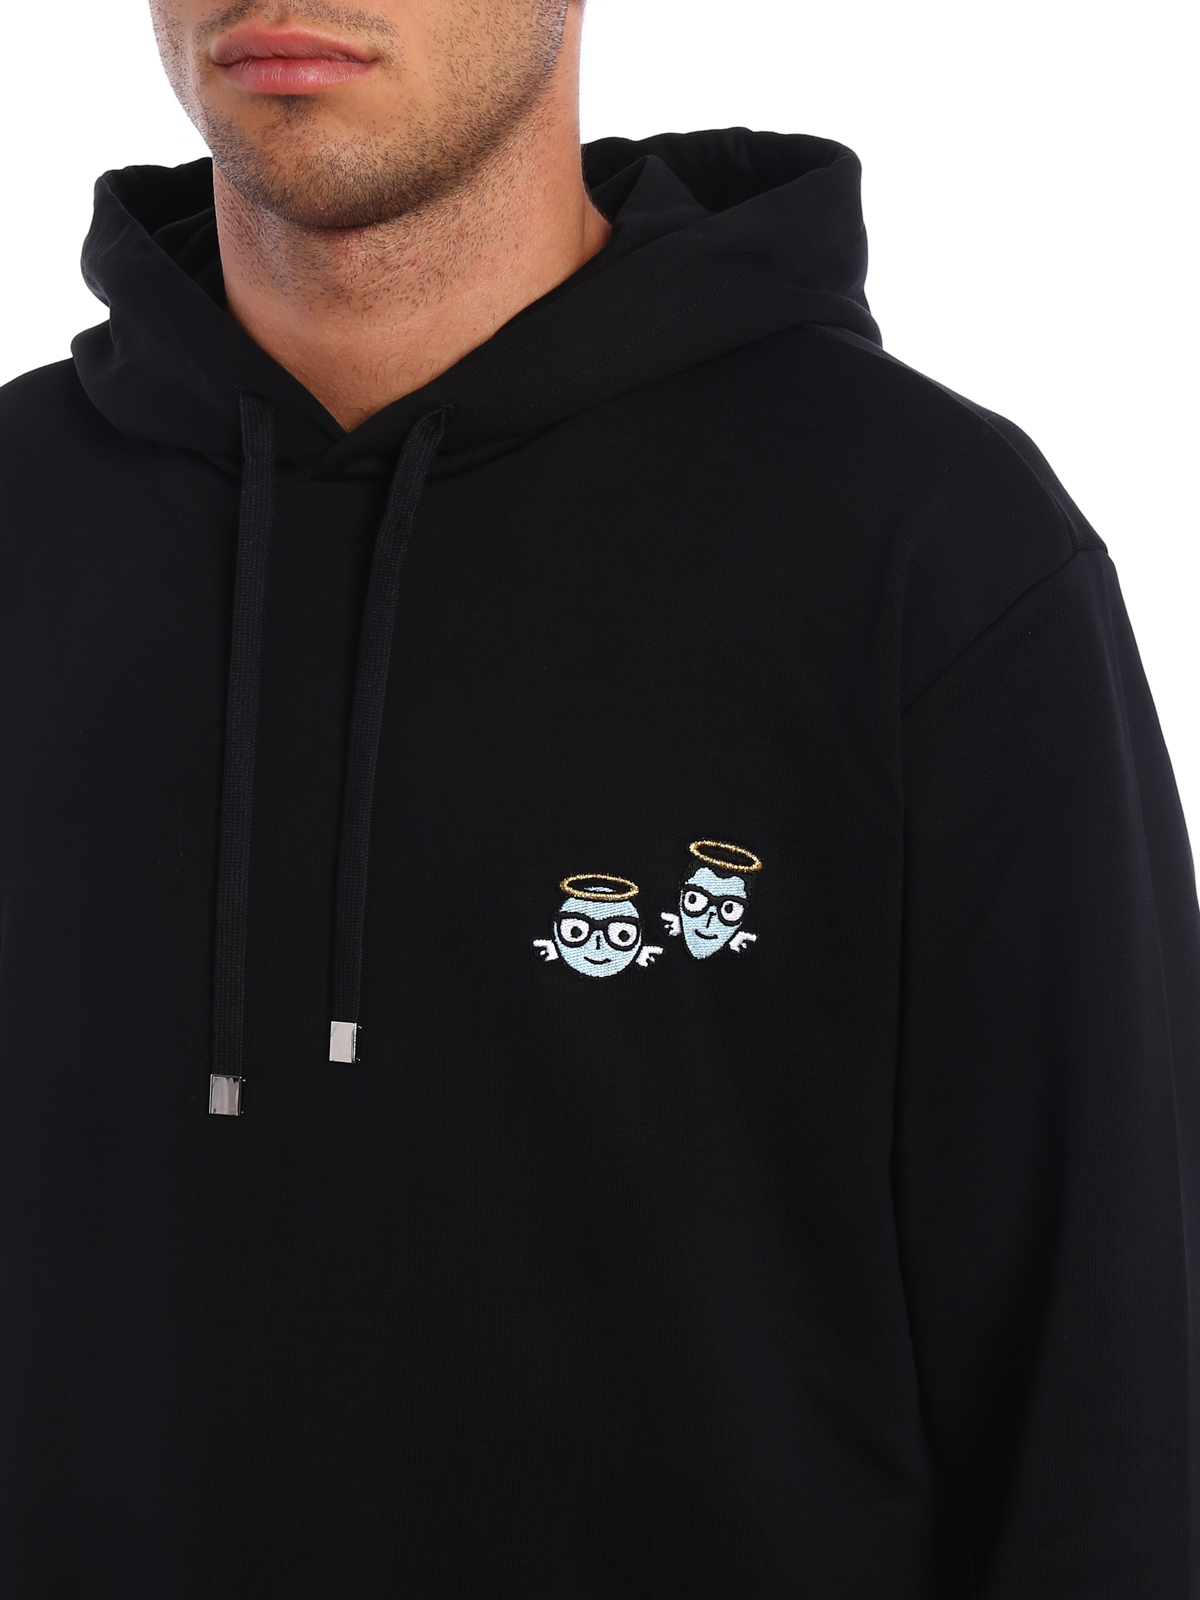 dgfamily embroidery cotton hoodie 